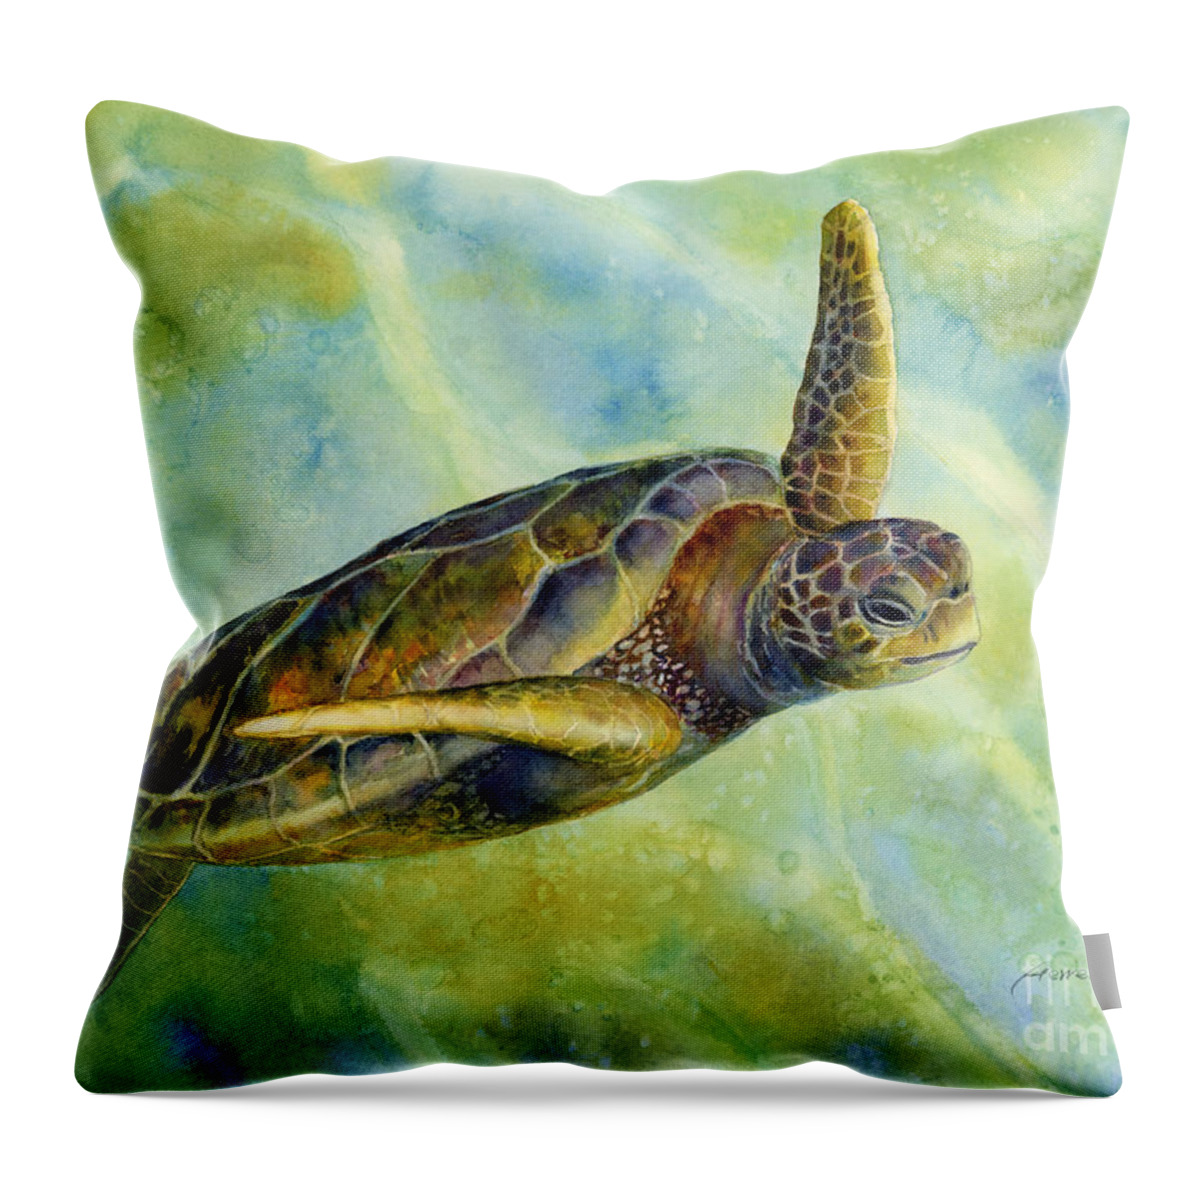 Underwater Throw Pillow featuring the painting Sea Turtle 2 by Hailey E Herrera